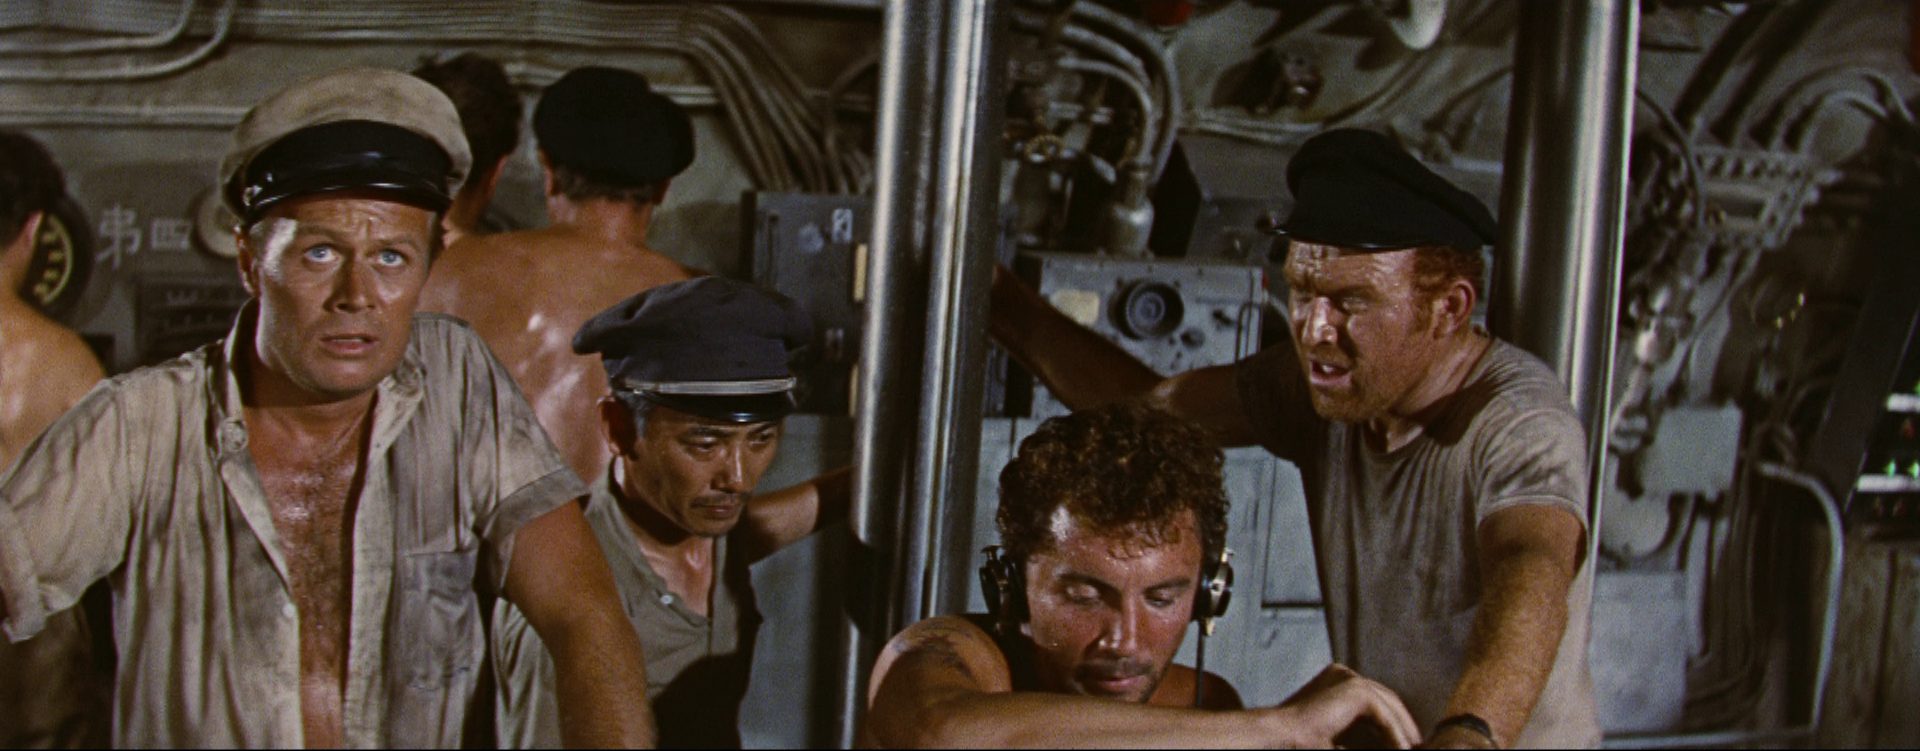 Richard Widmark as commander in the presence of some crew members in a sweaty atmosphere in the submarine.